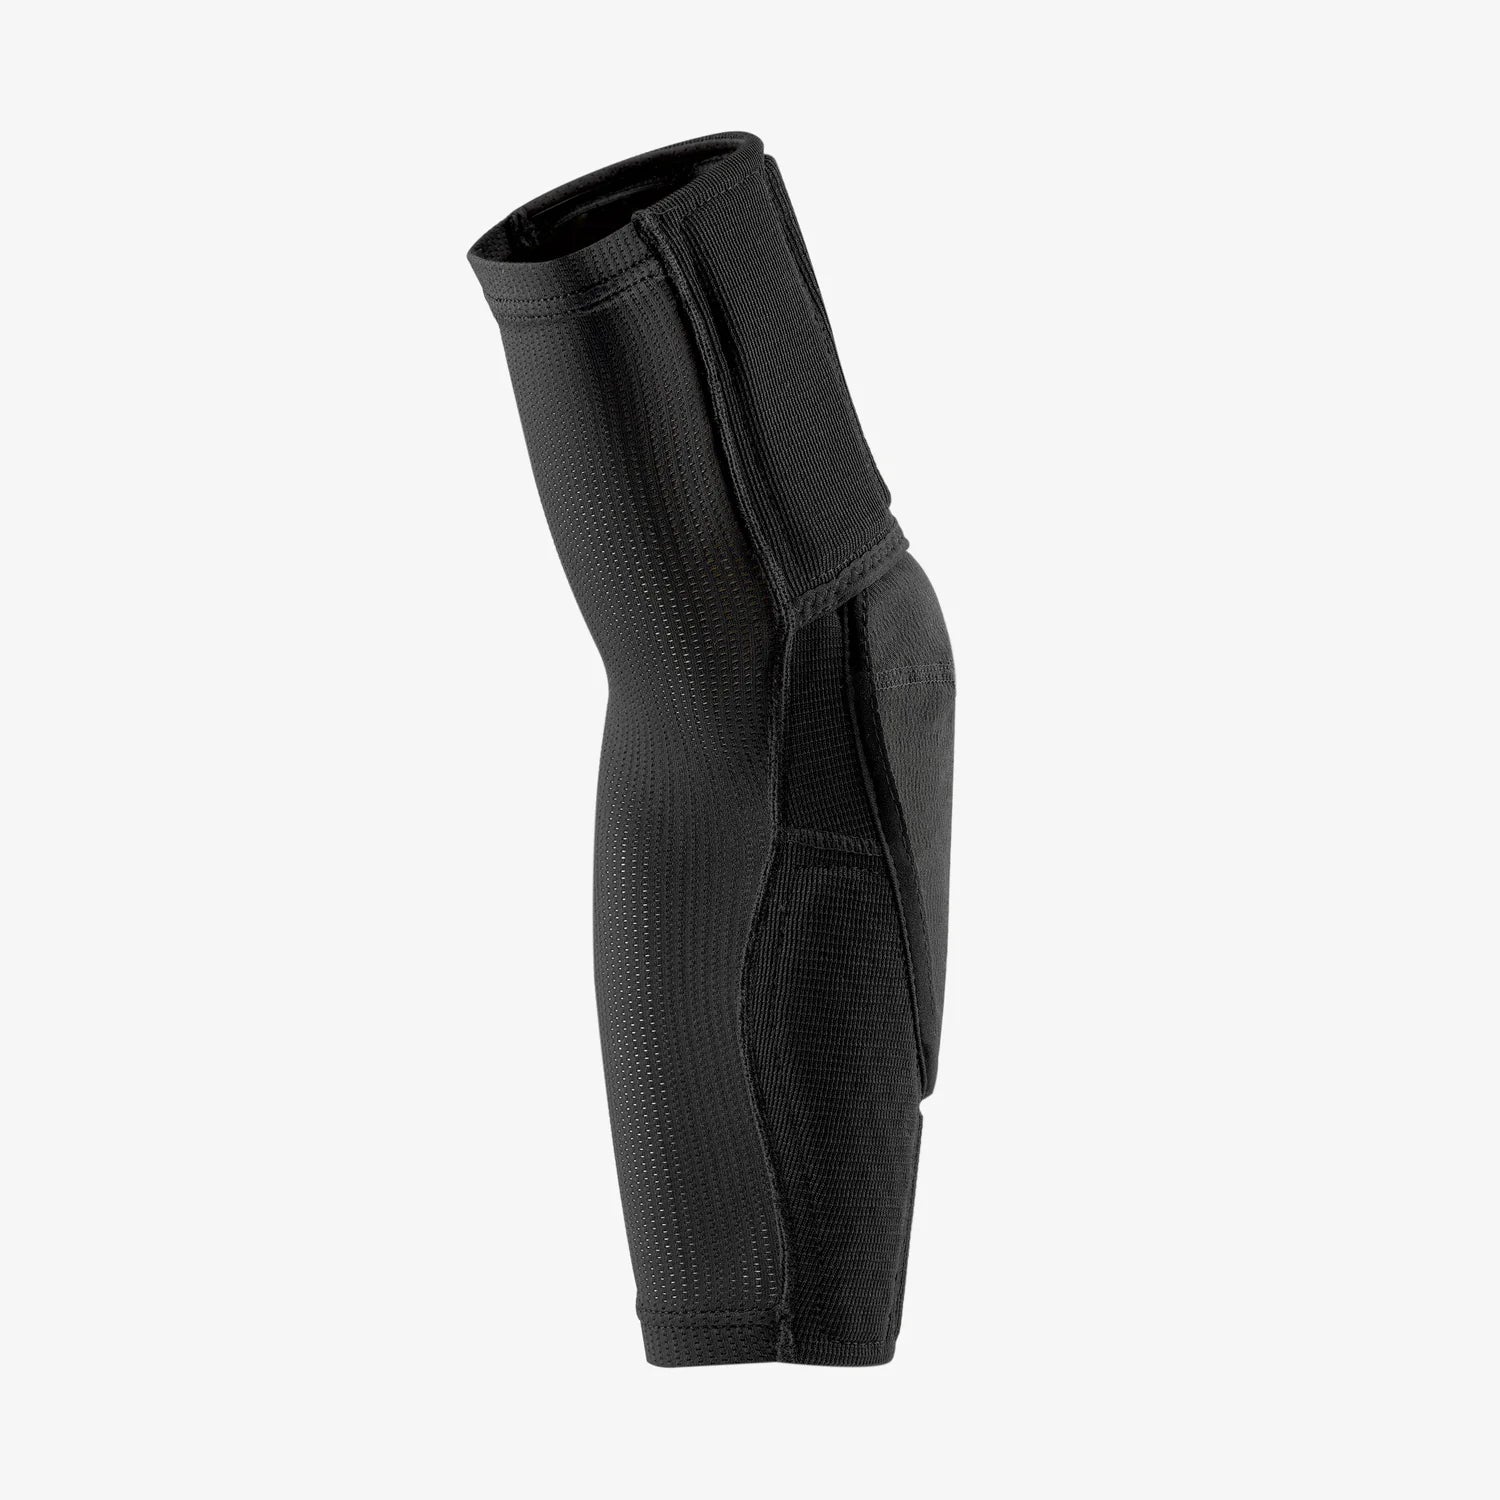 Black 100% Teratec Elbow pad inside elbow pic